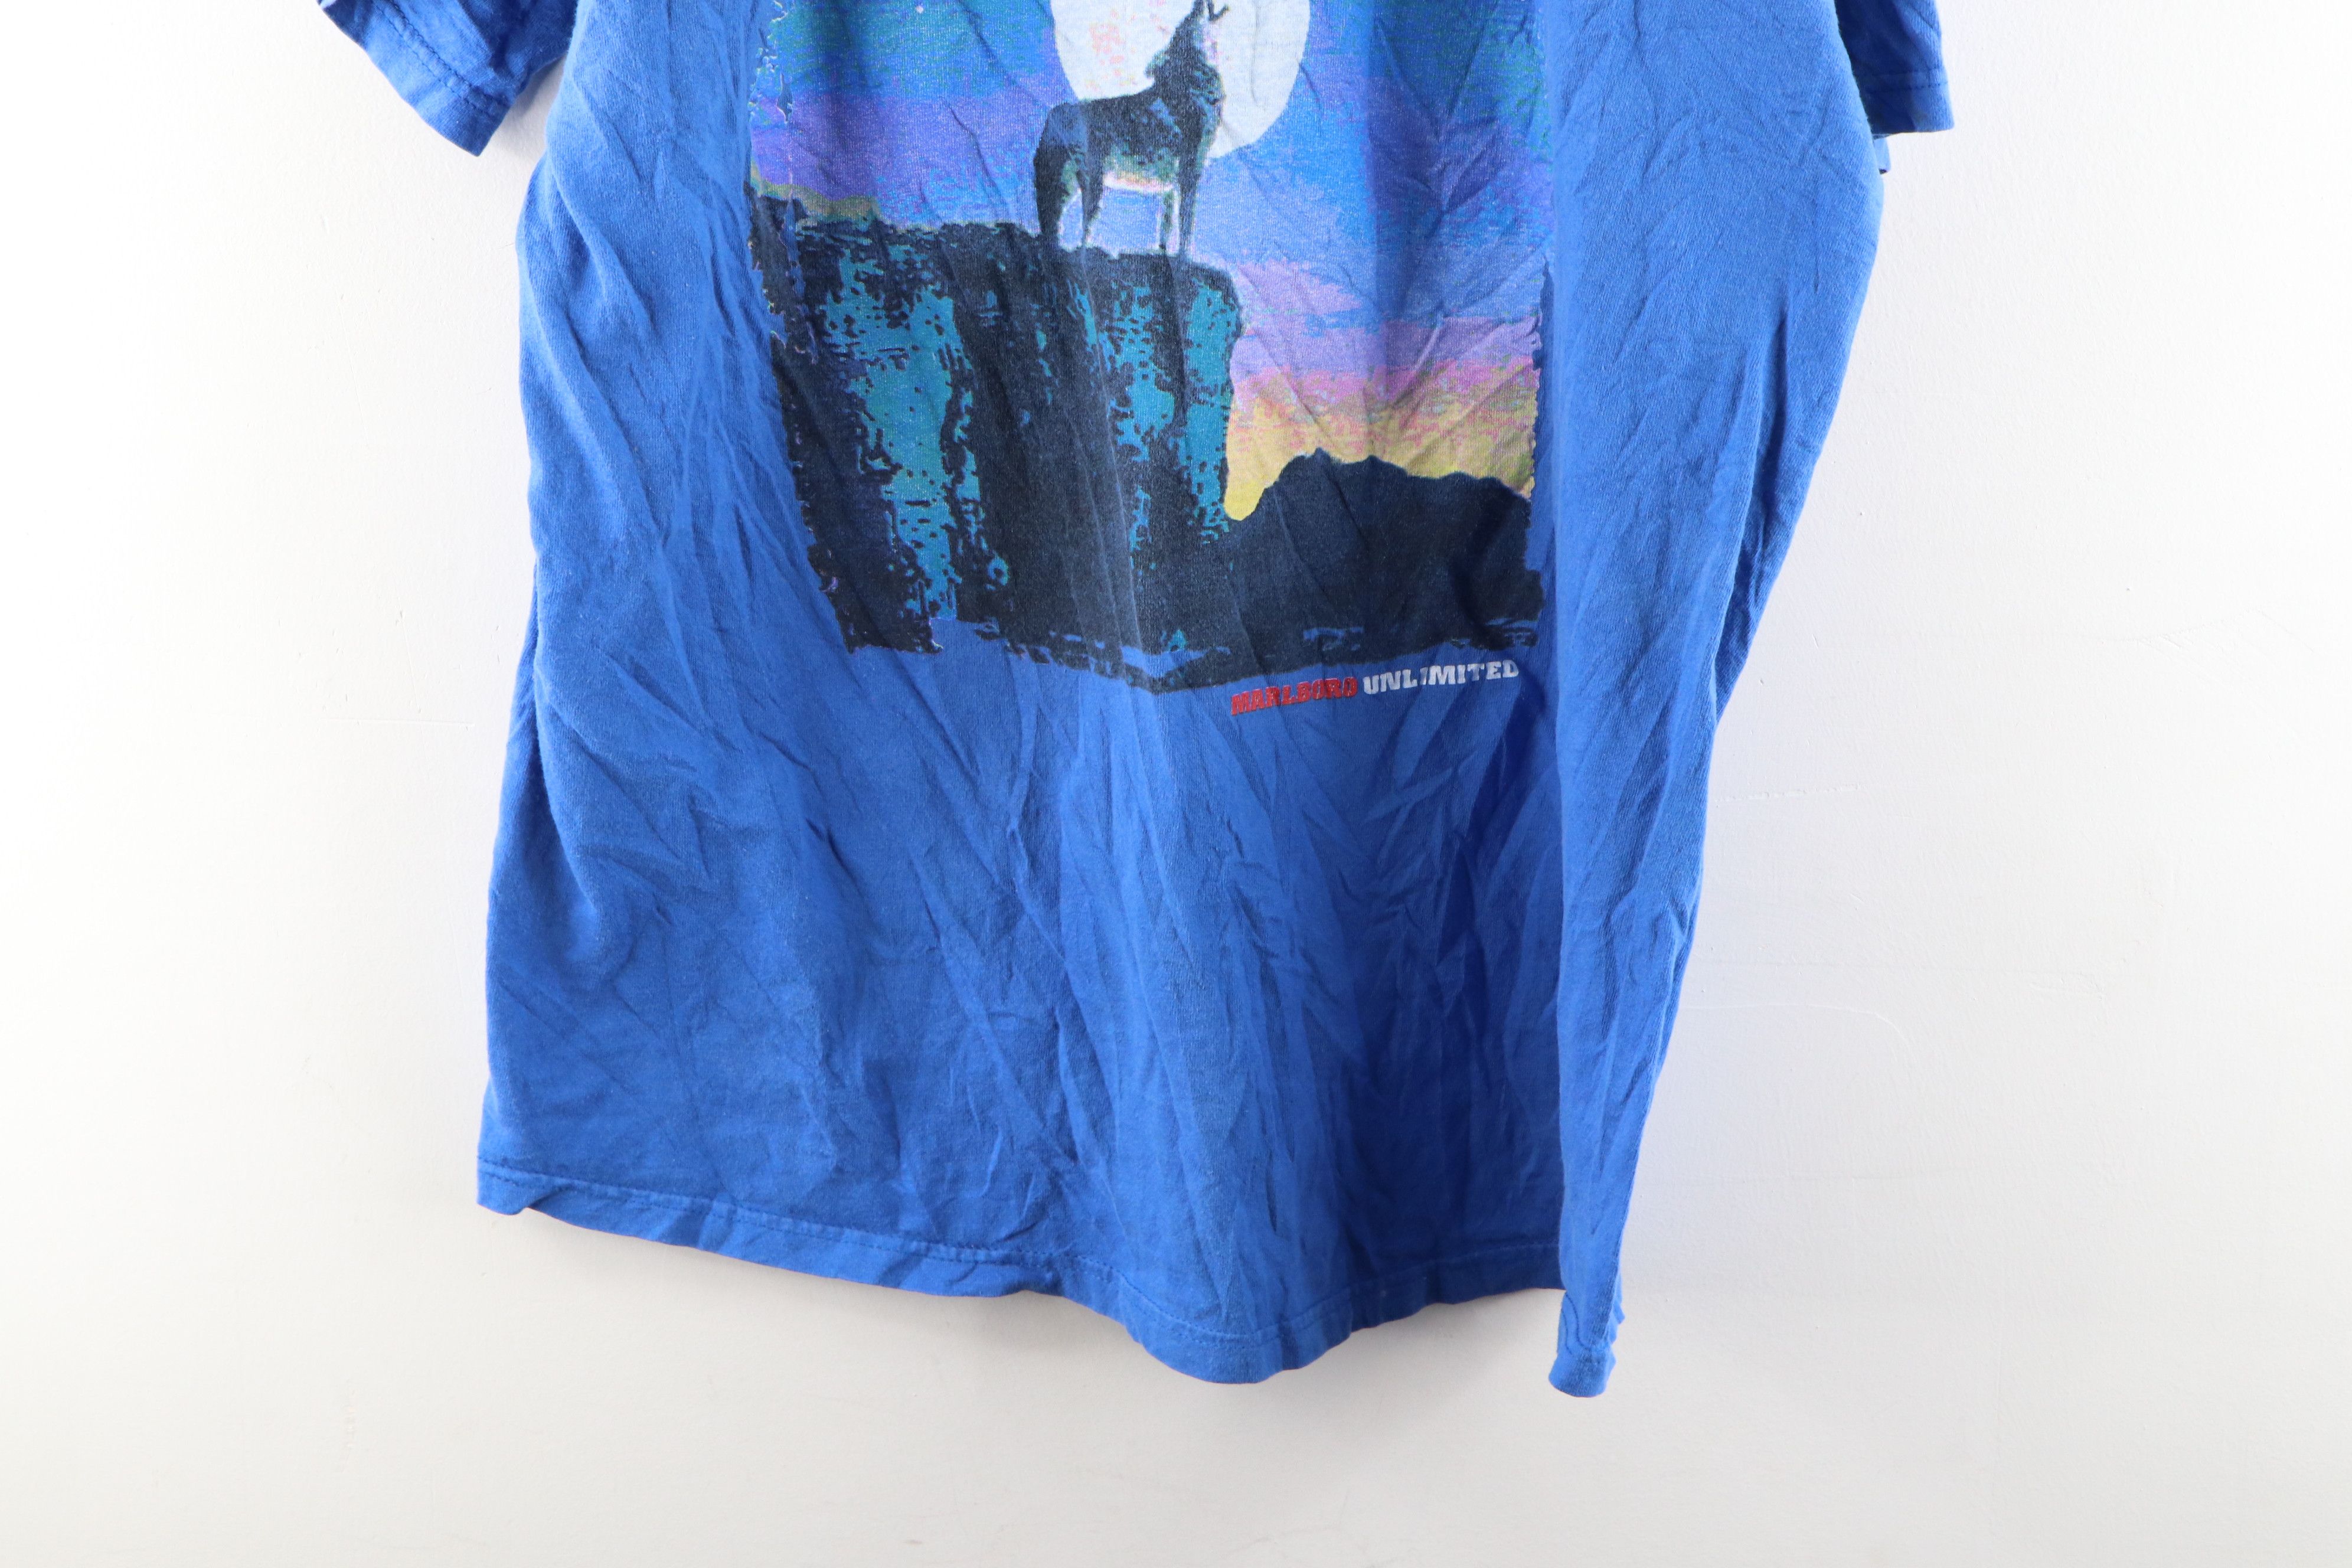 Vintage Vintage 90s Marlboro Distressed Wolf Double Sided T-Shirt Size US XL / EU 56 / 4 - 9 Preview